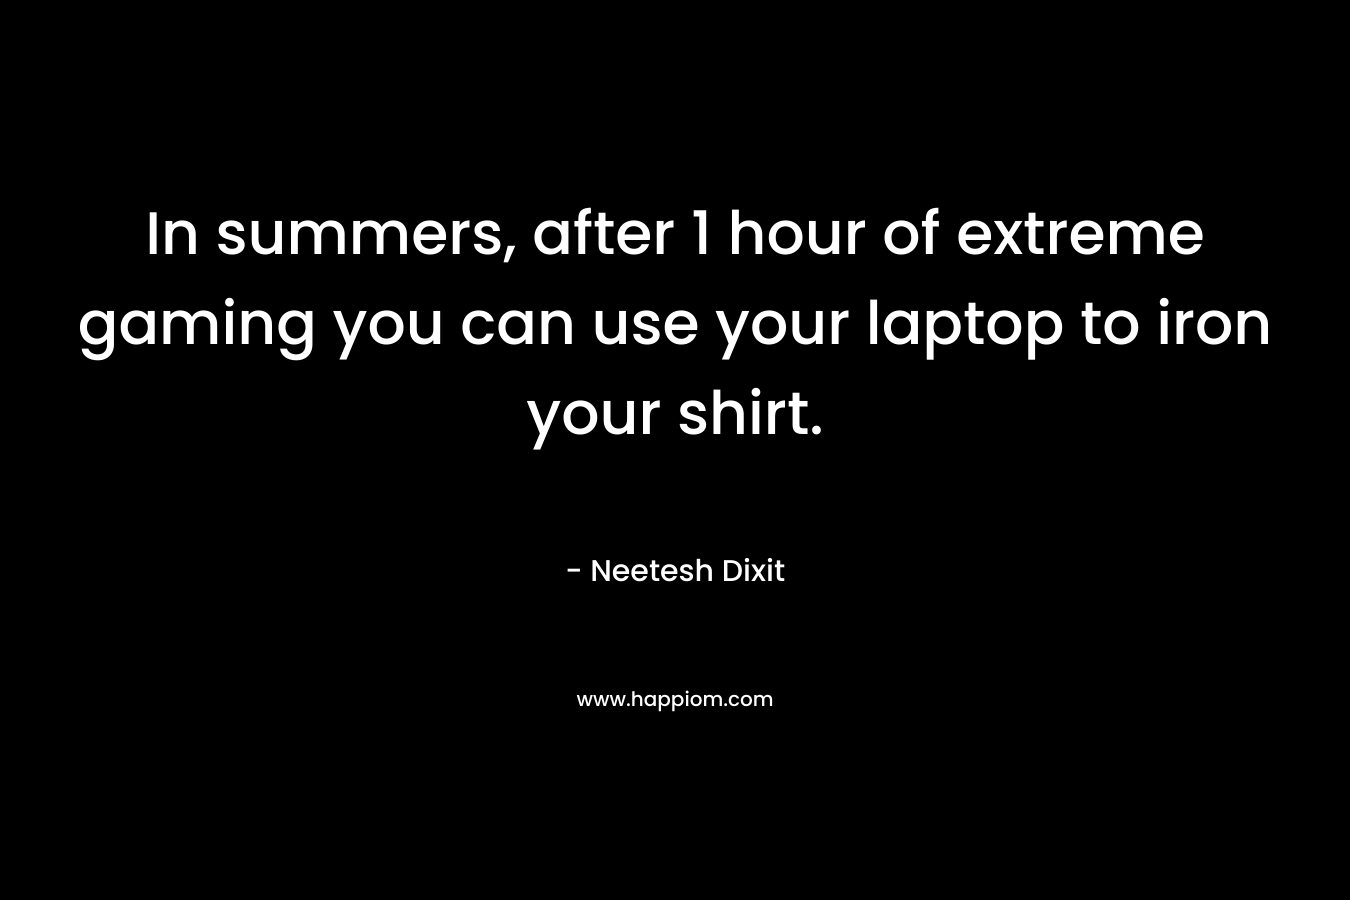 In summers, after 1 hour of extreme gaming you can use your laptop to iron your shirt.